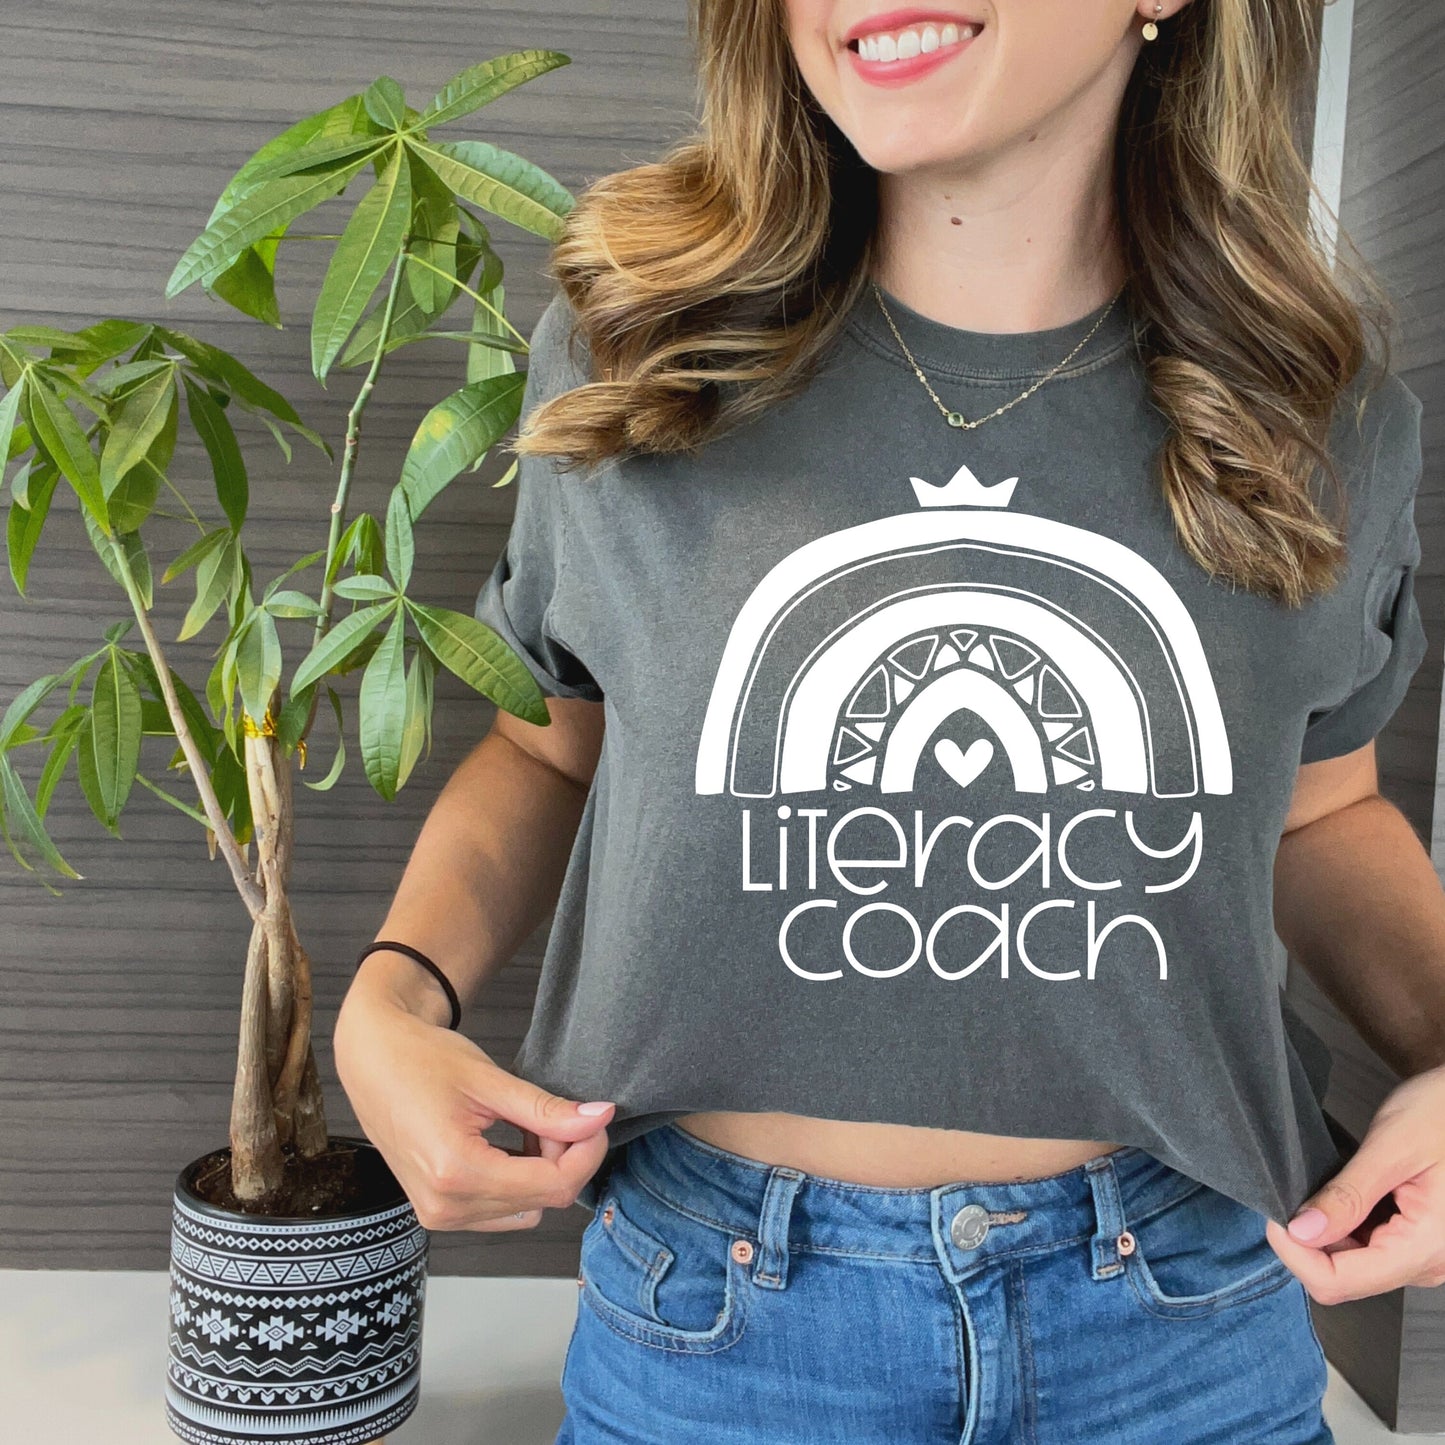 School Literacy Coach Shirt: Inspire and Motivate with this Stylish Literacy Coach Tee